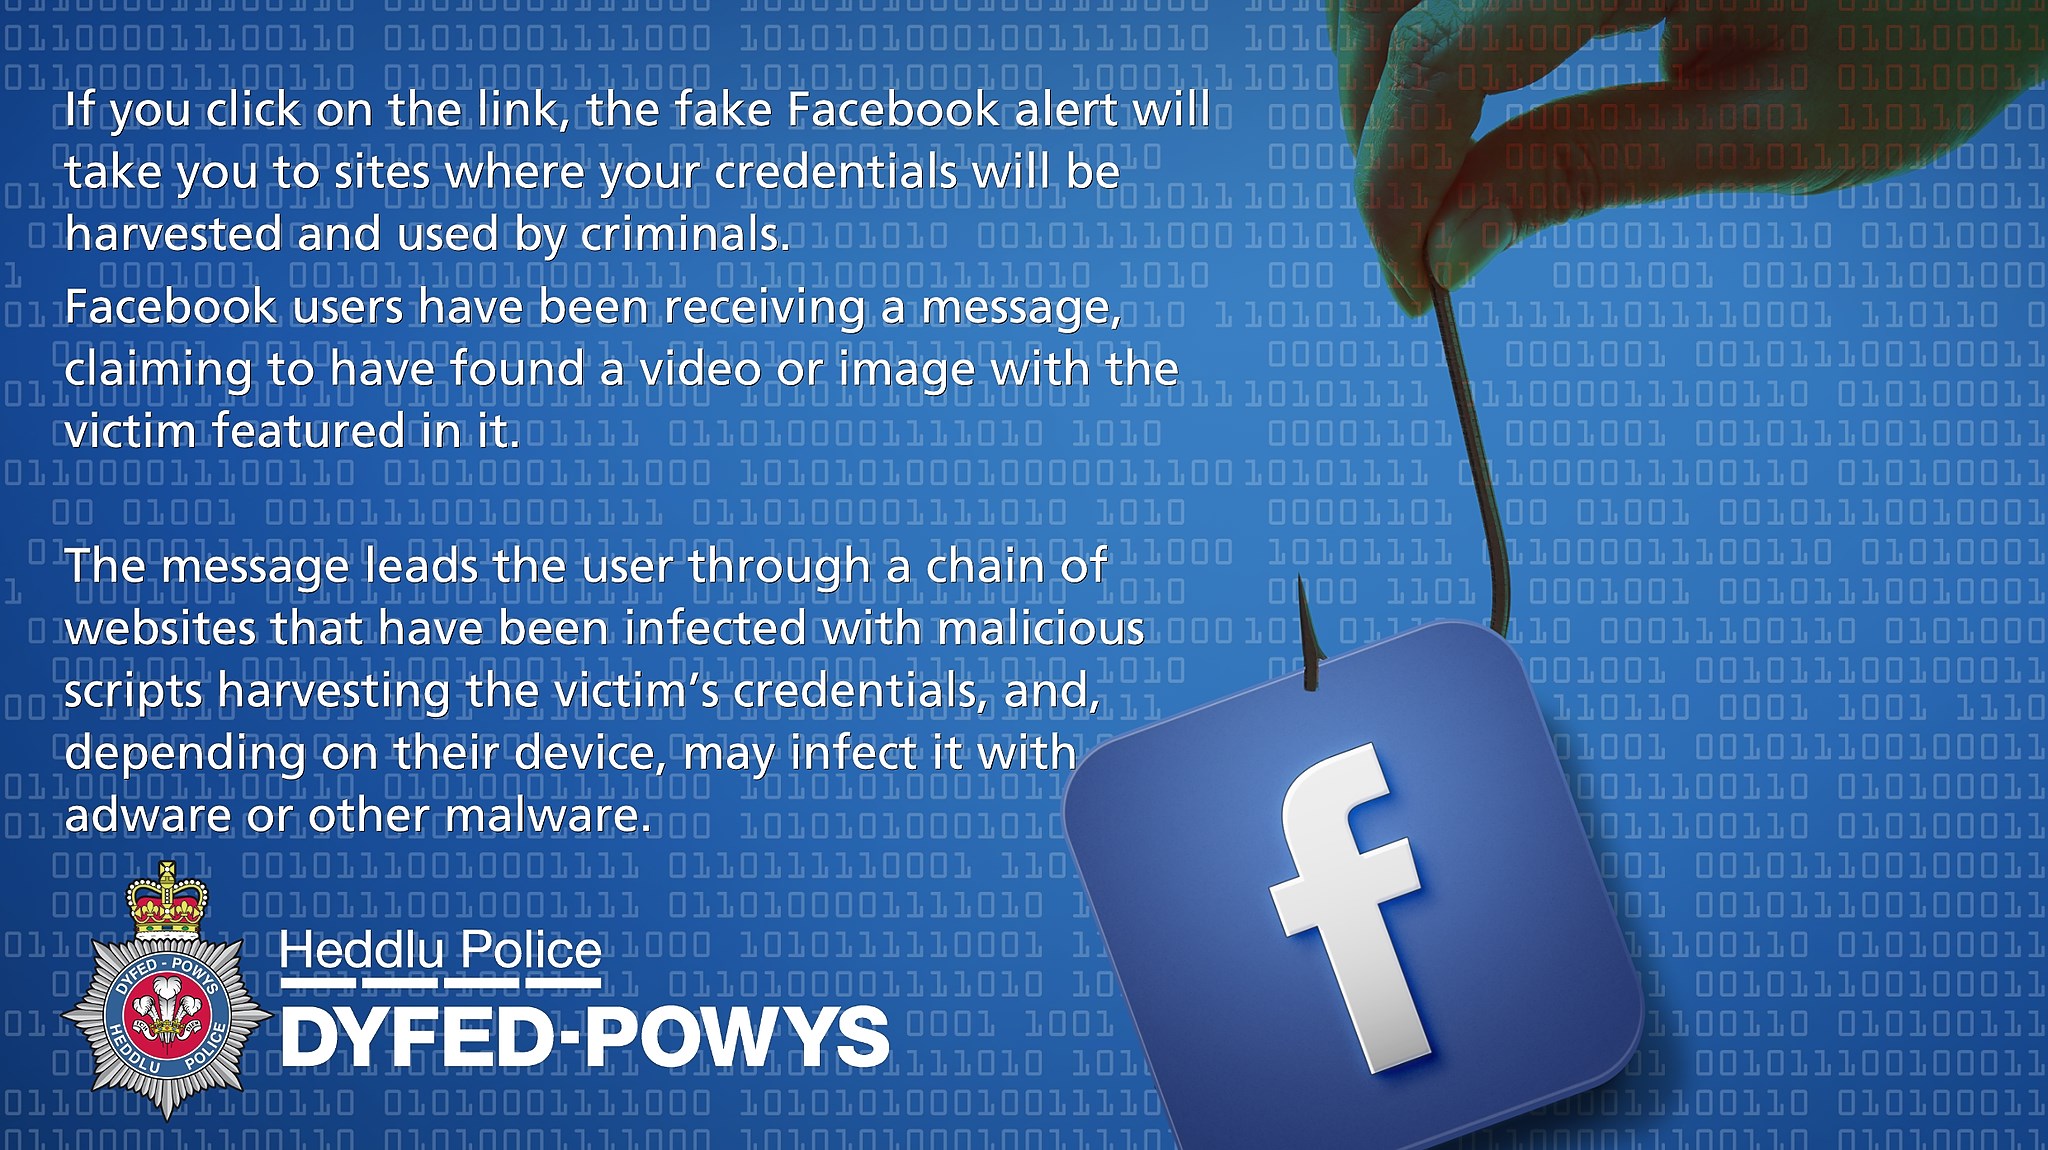 NEWS | Police warn public about Facebook message scam